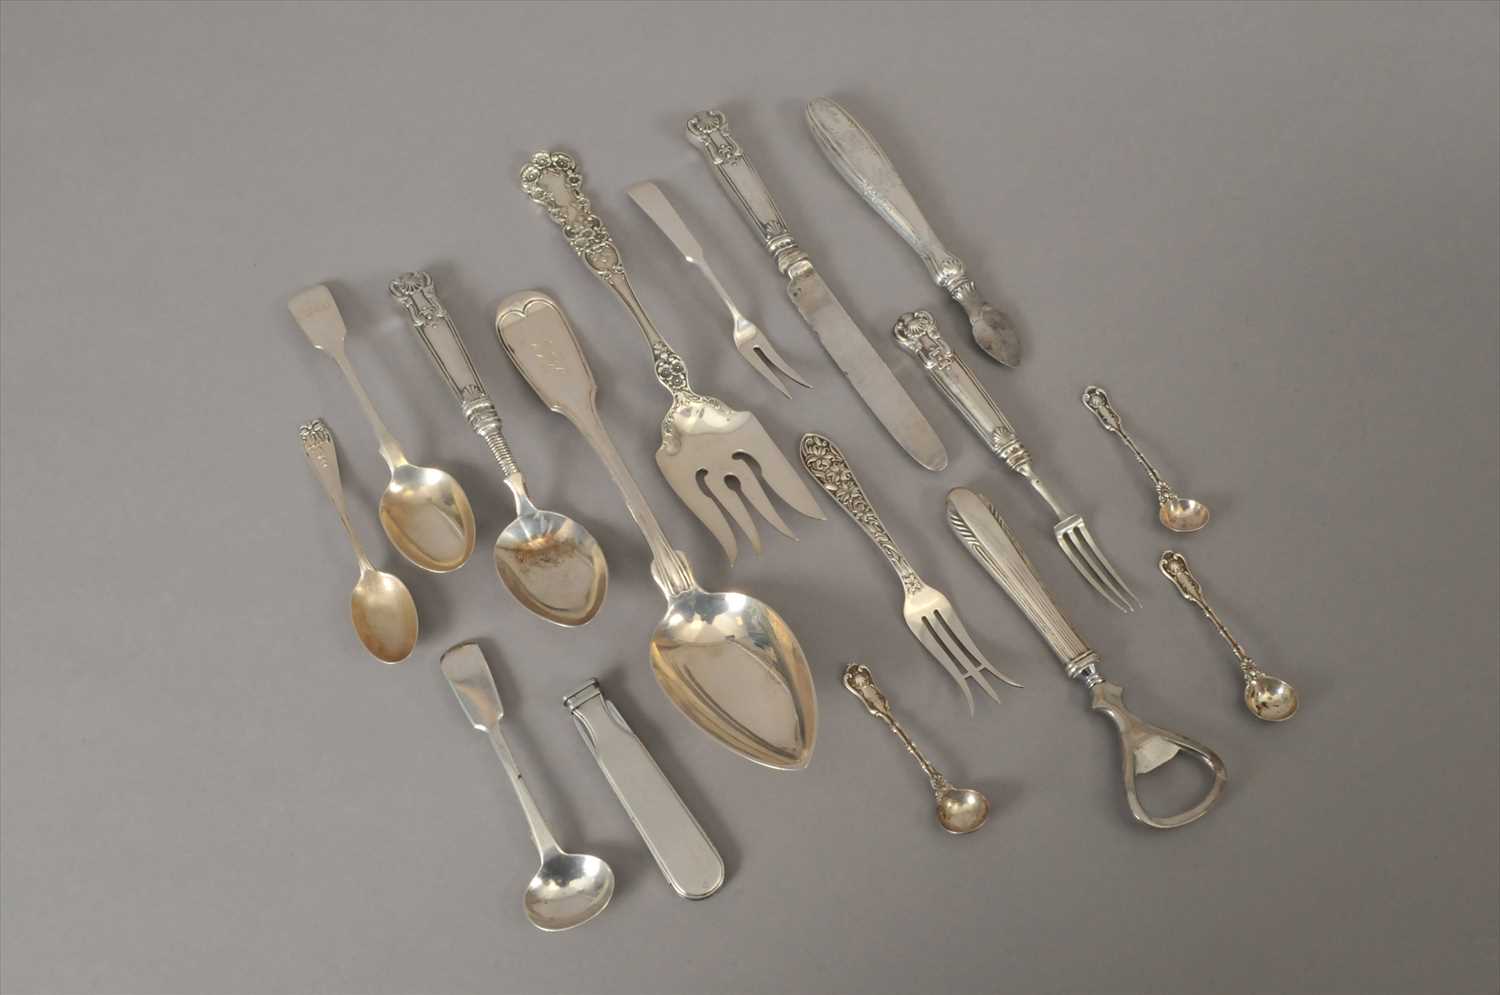 Lot 7 - A small collection of American and British silver flatware